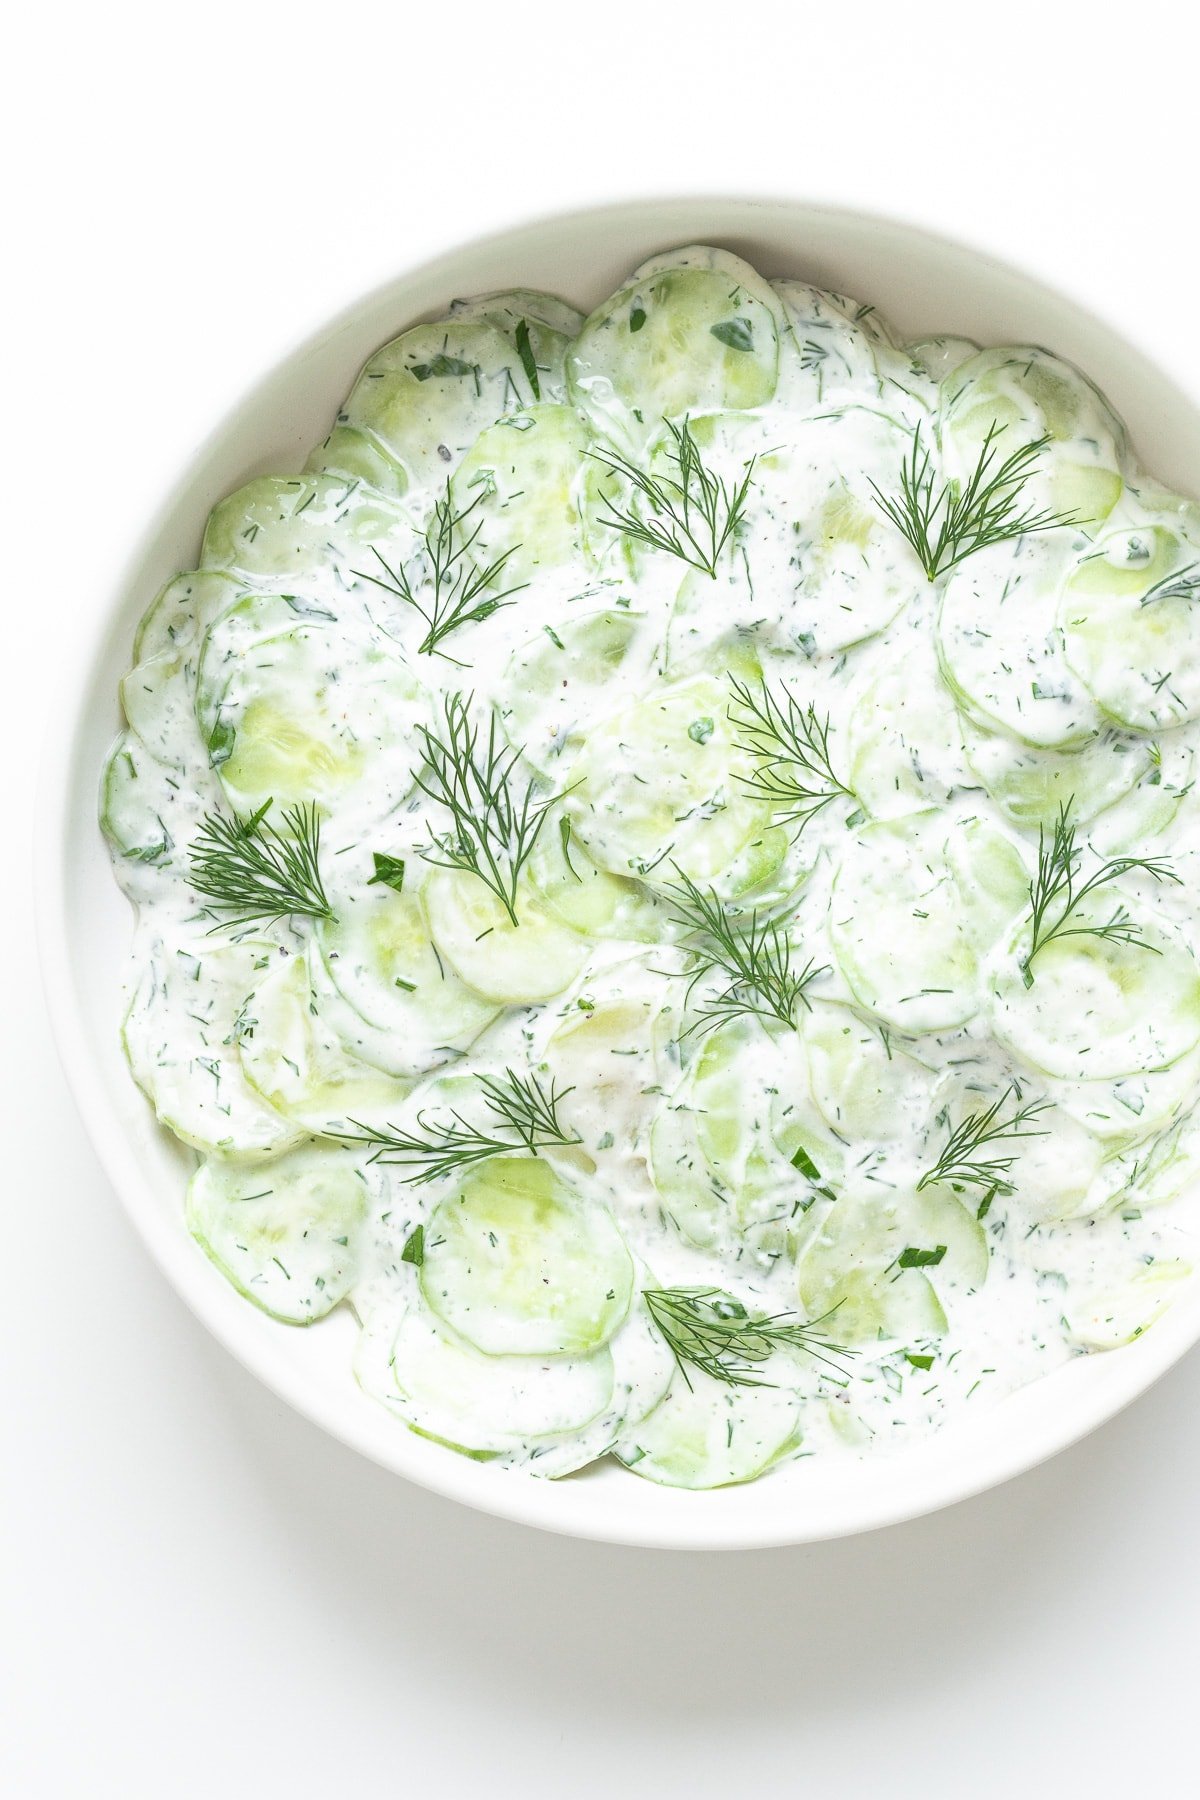 Overhead photo of creamy German cucumber salad in a white bowl.